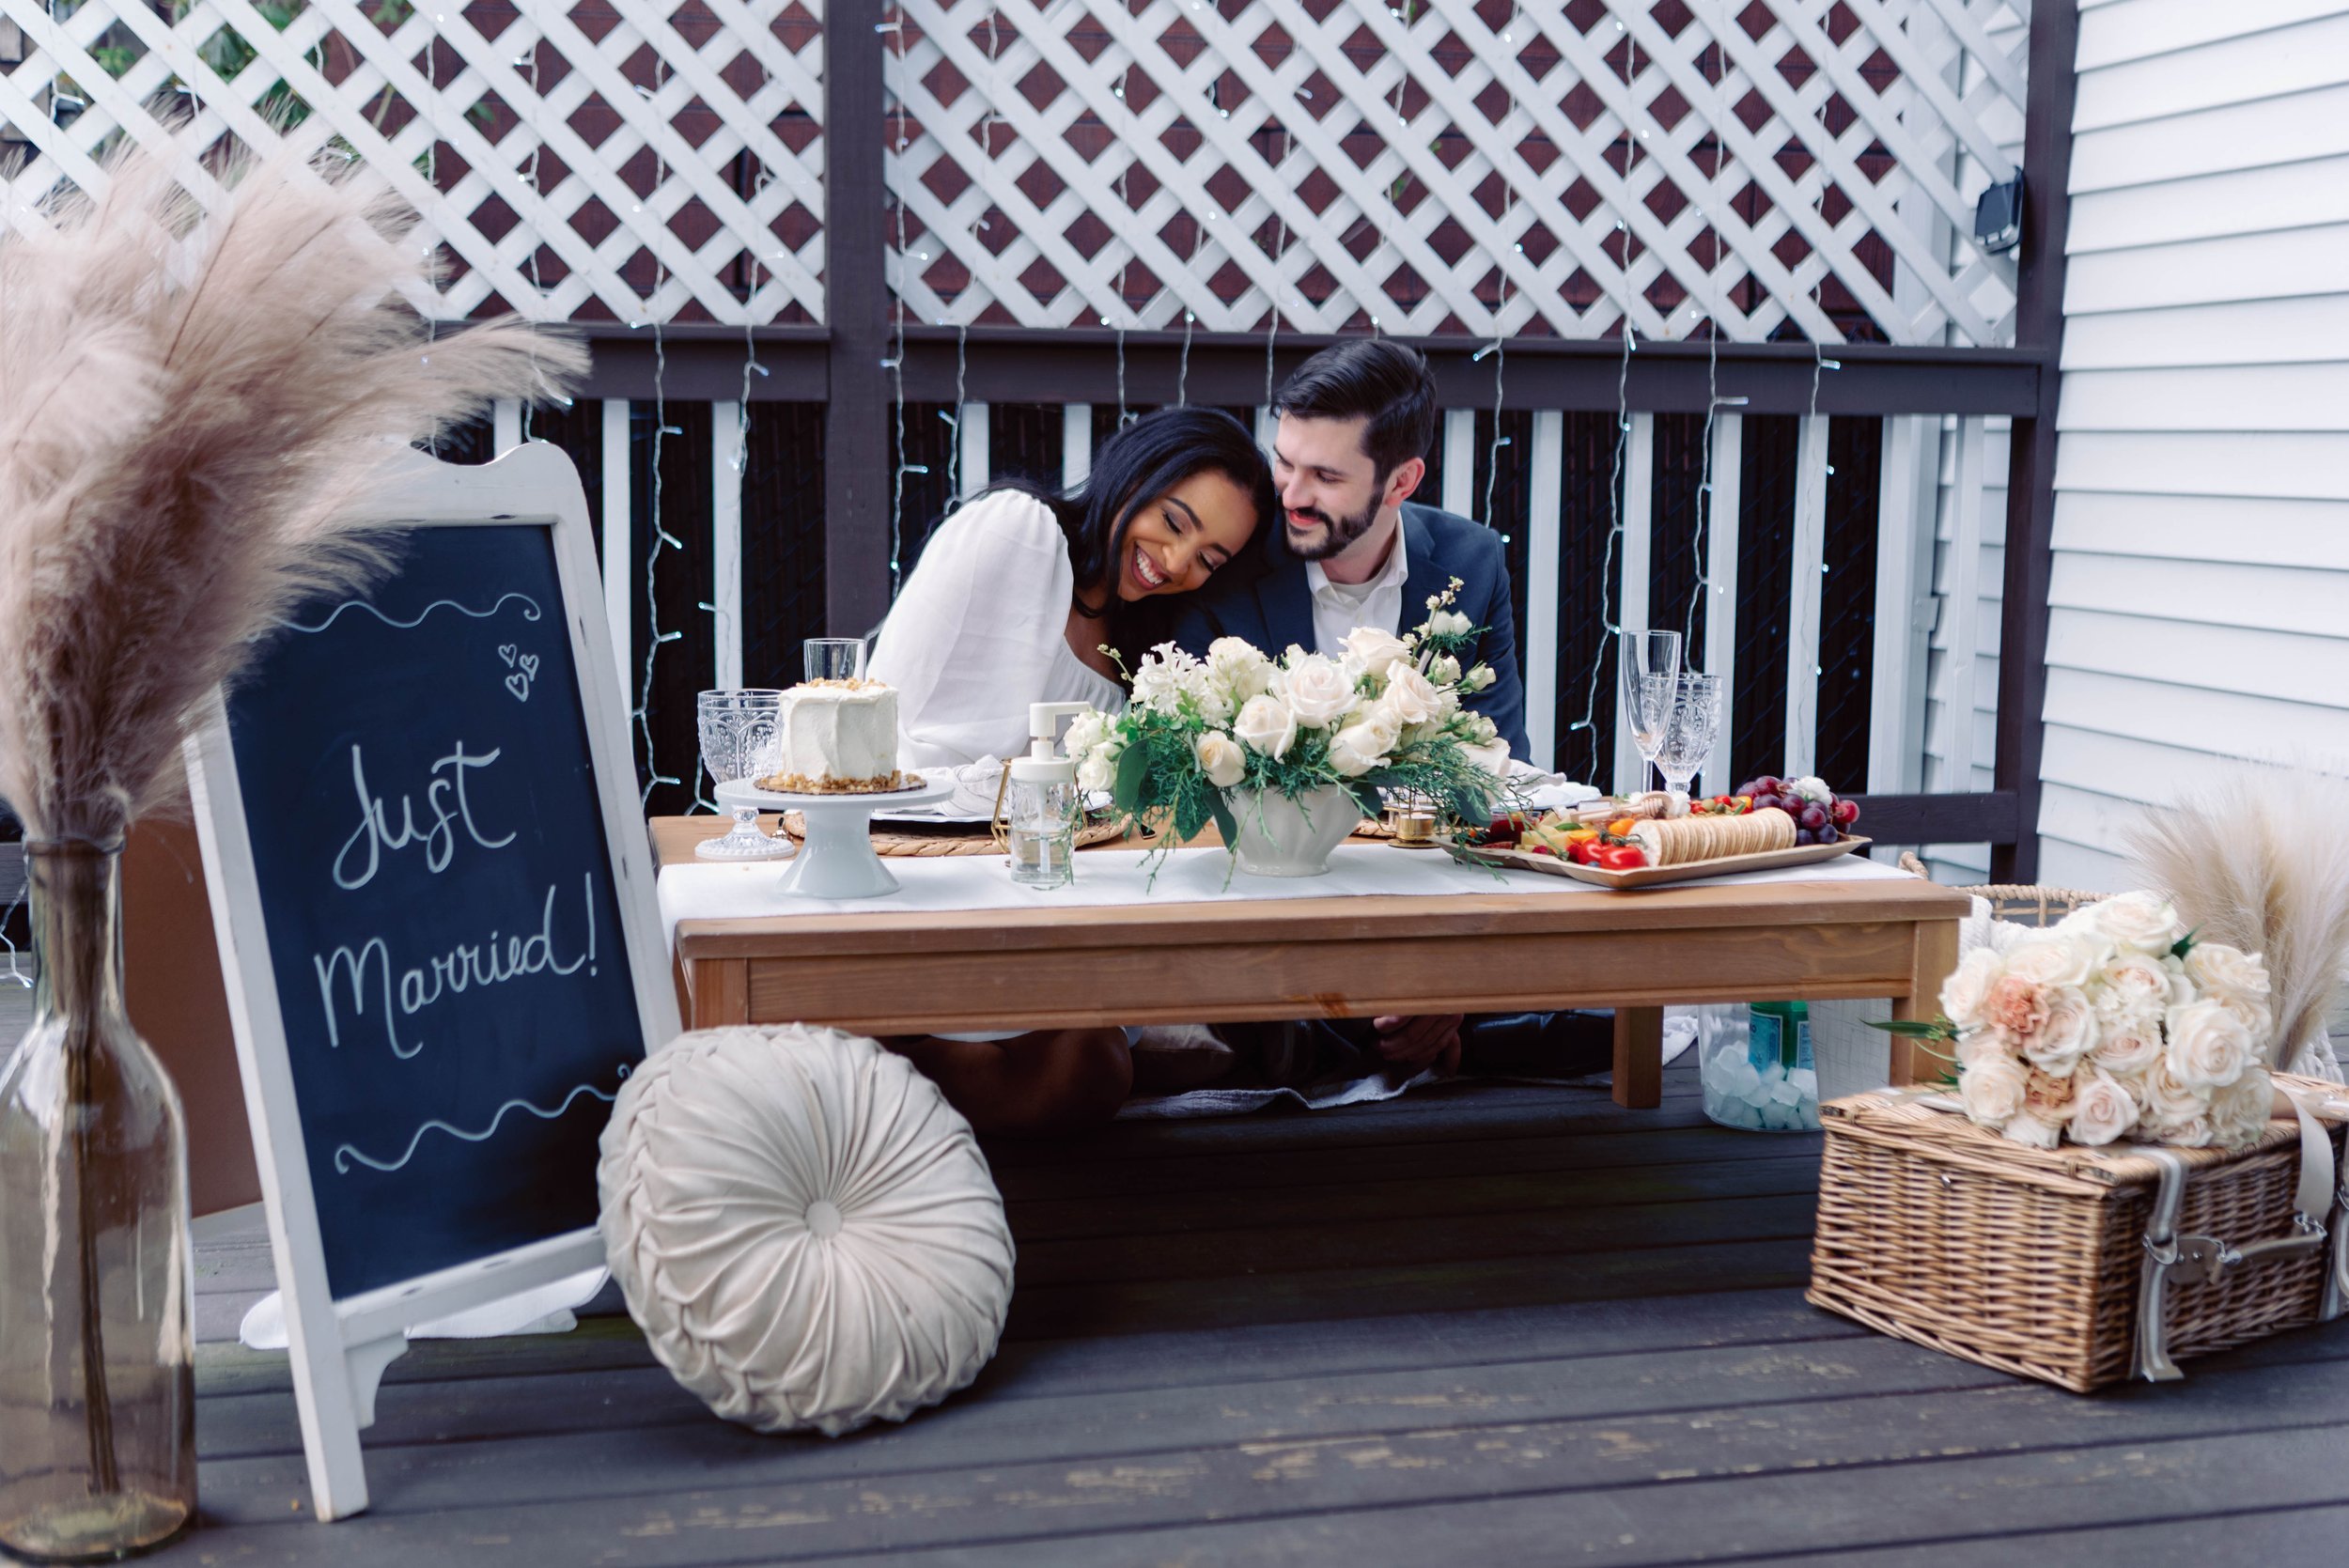 Boston Elopement: couple's private picnic at their airbnb. Luxury picnics are an amazing addition to your elopement day. Whether it's just you two or a small dinner from friends and family...a beautiful, customizable option. Let's plan your picnic!